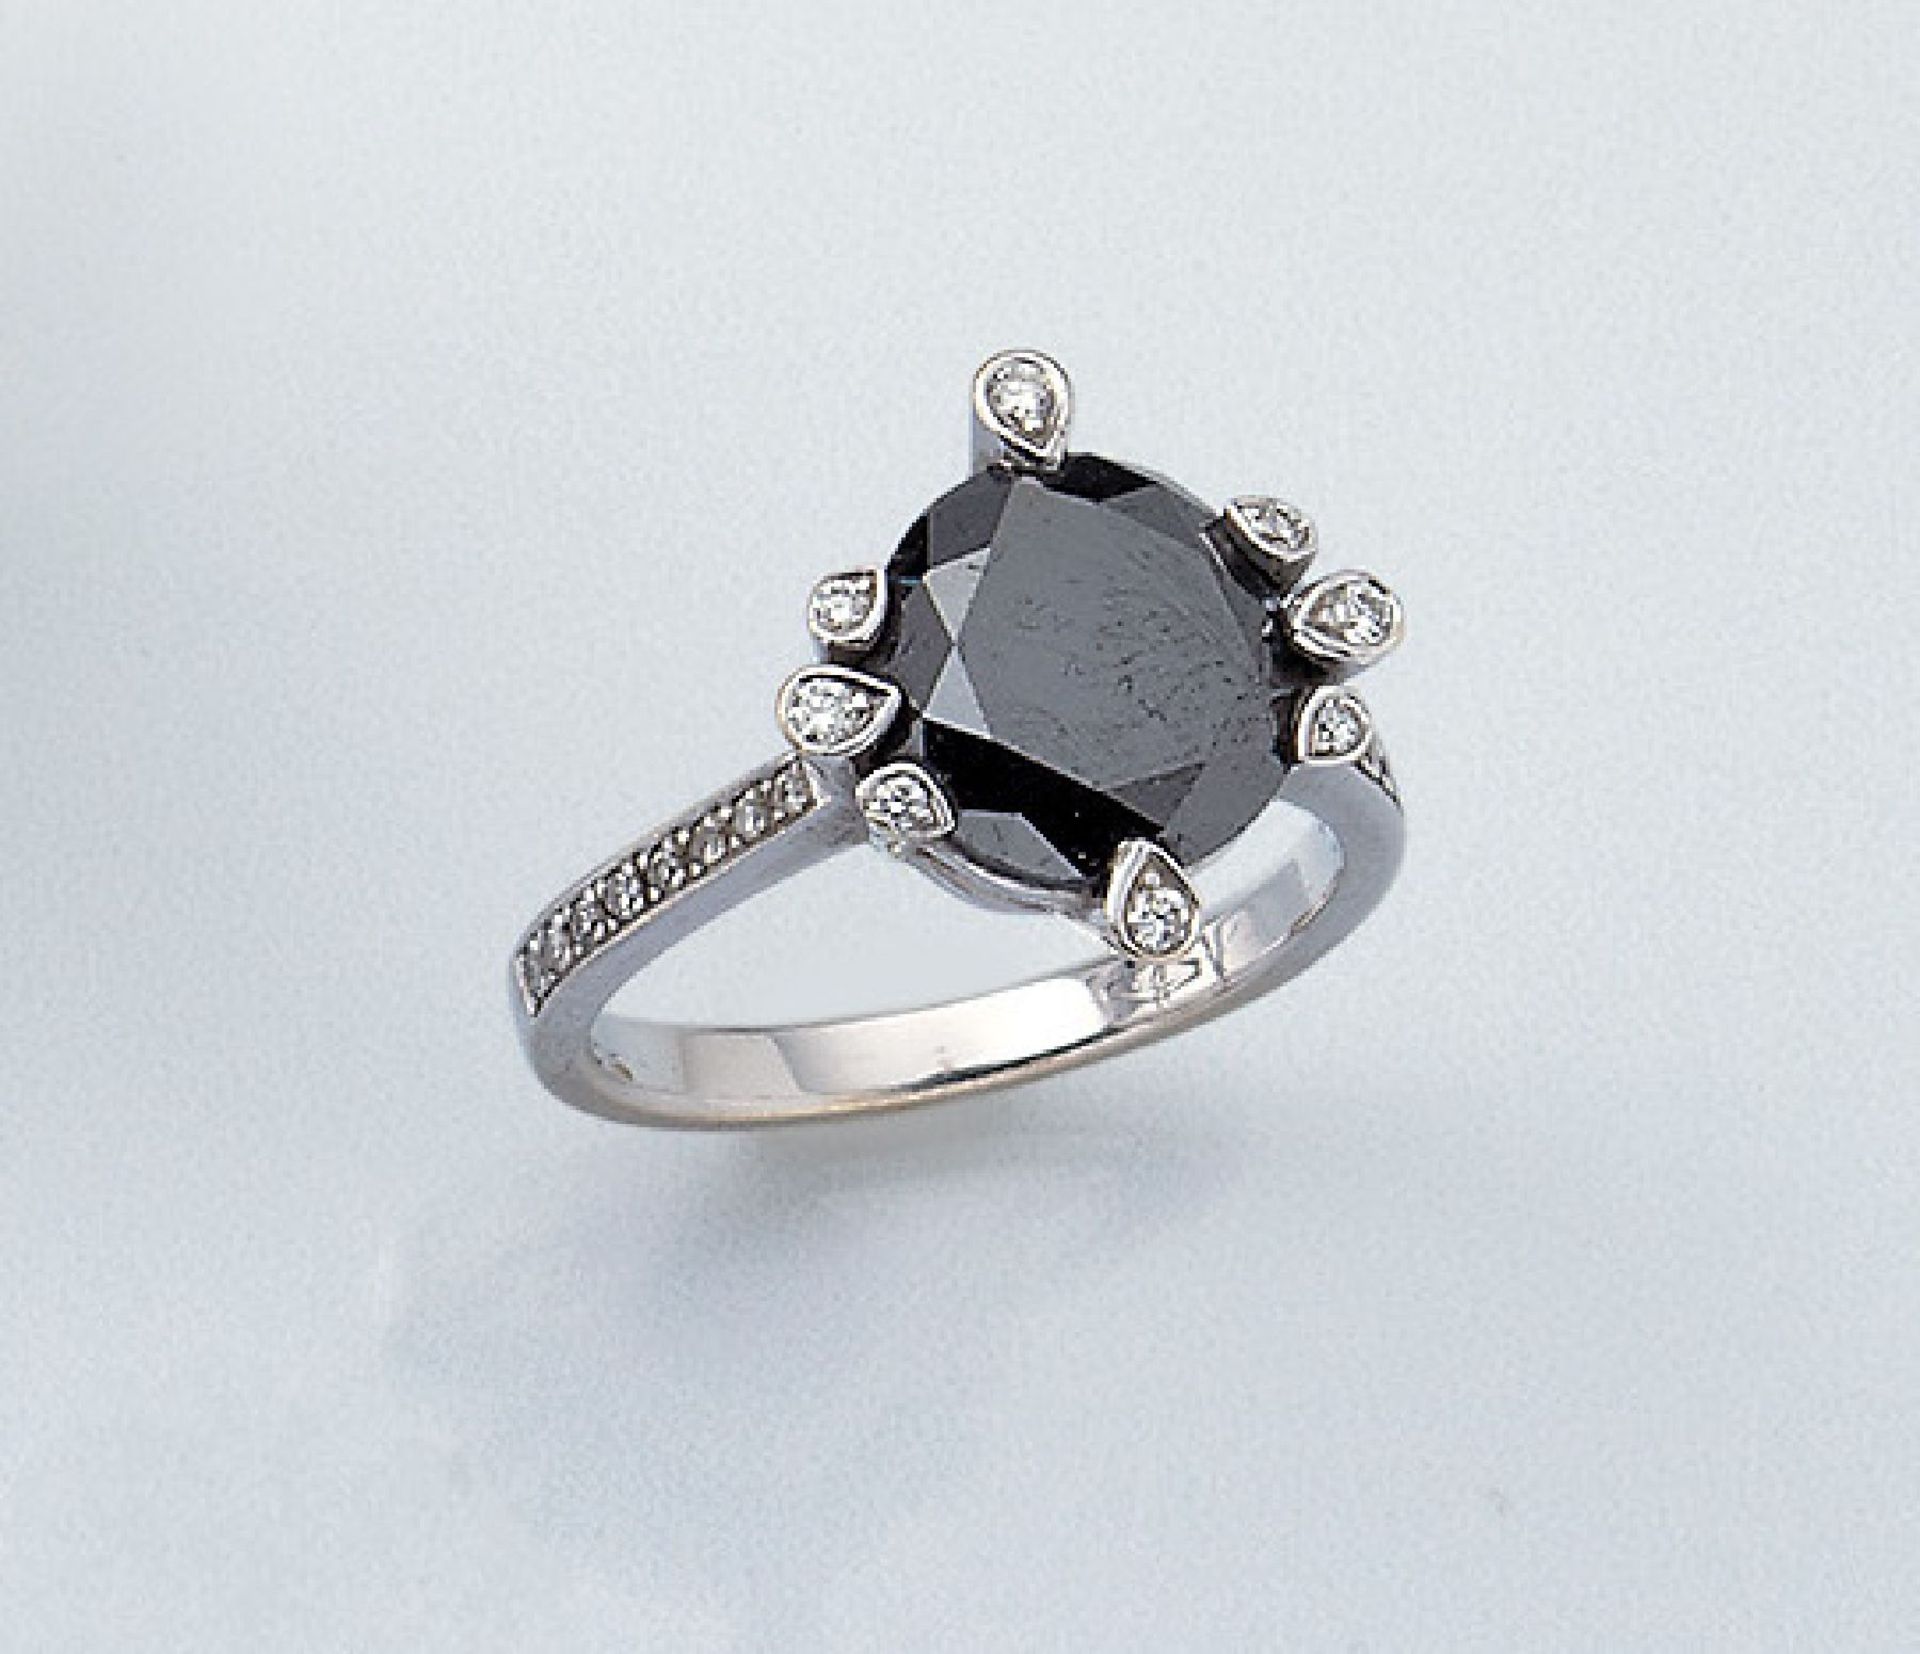 18 kt gold ring with diamond and brilliants, WG 750/000, black diamond approx. 4.10 ct treated, 24